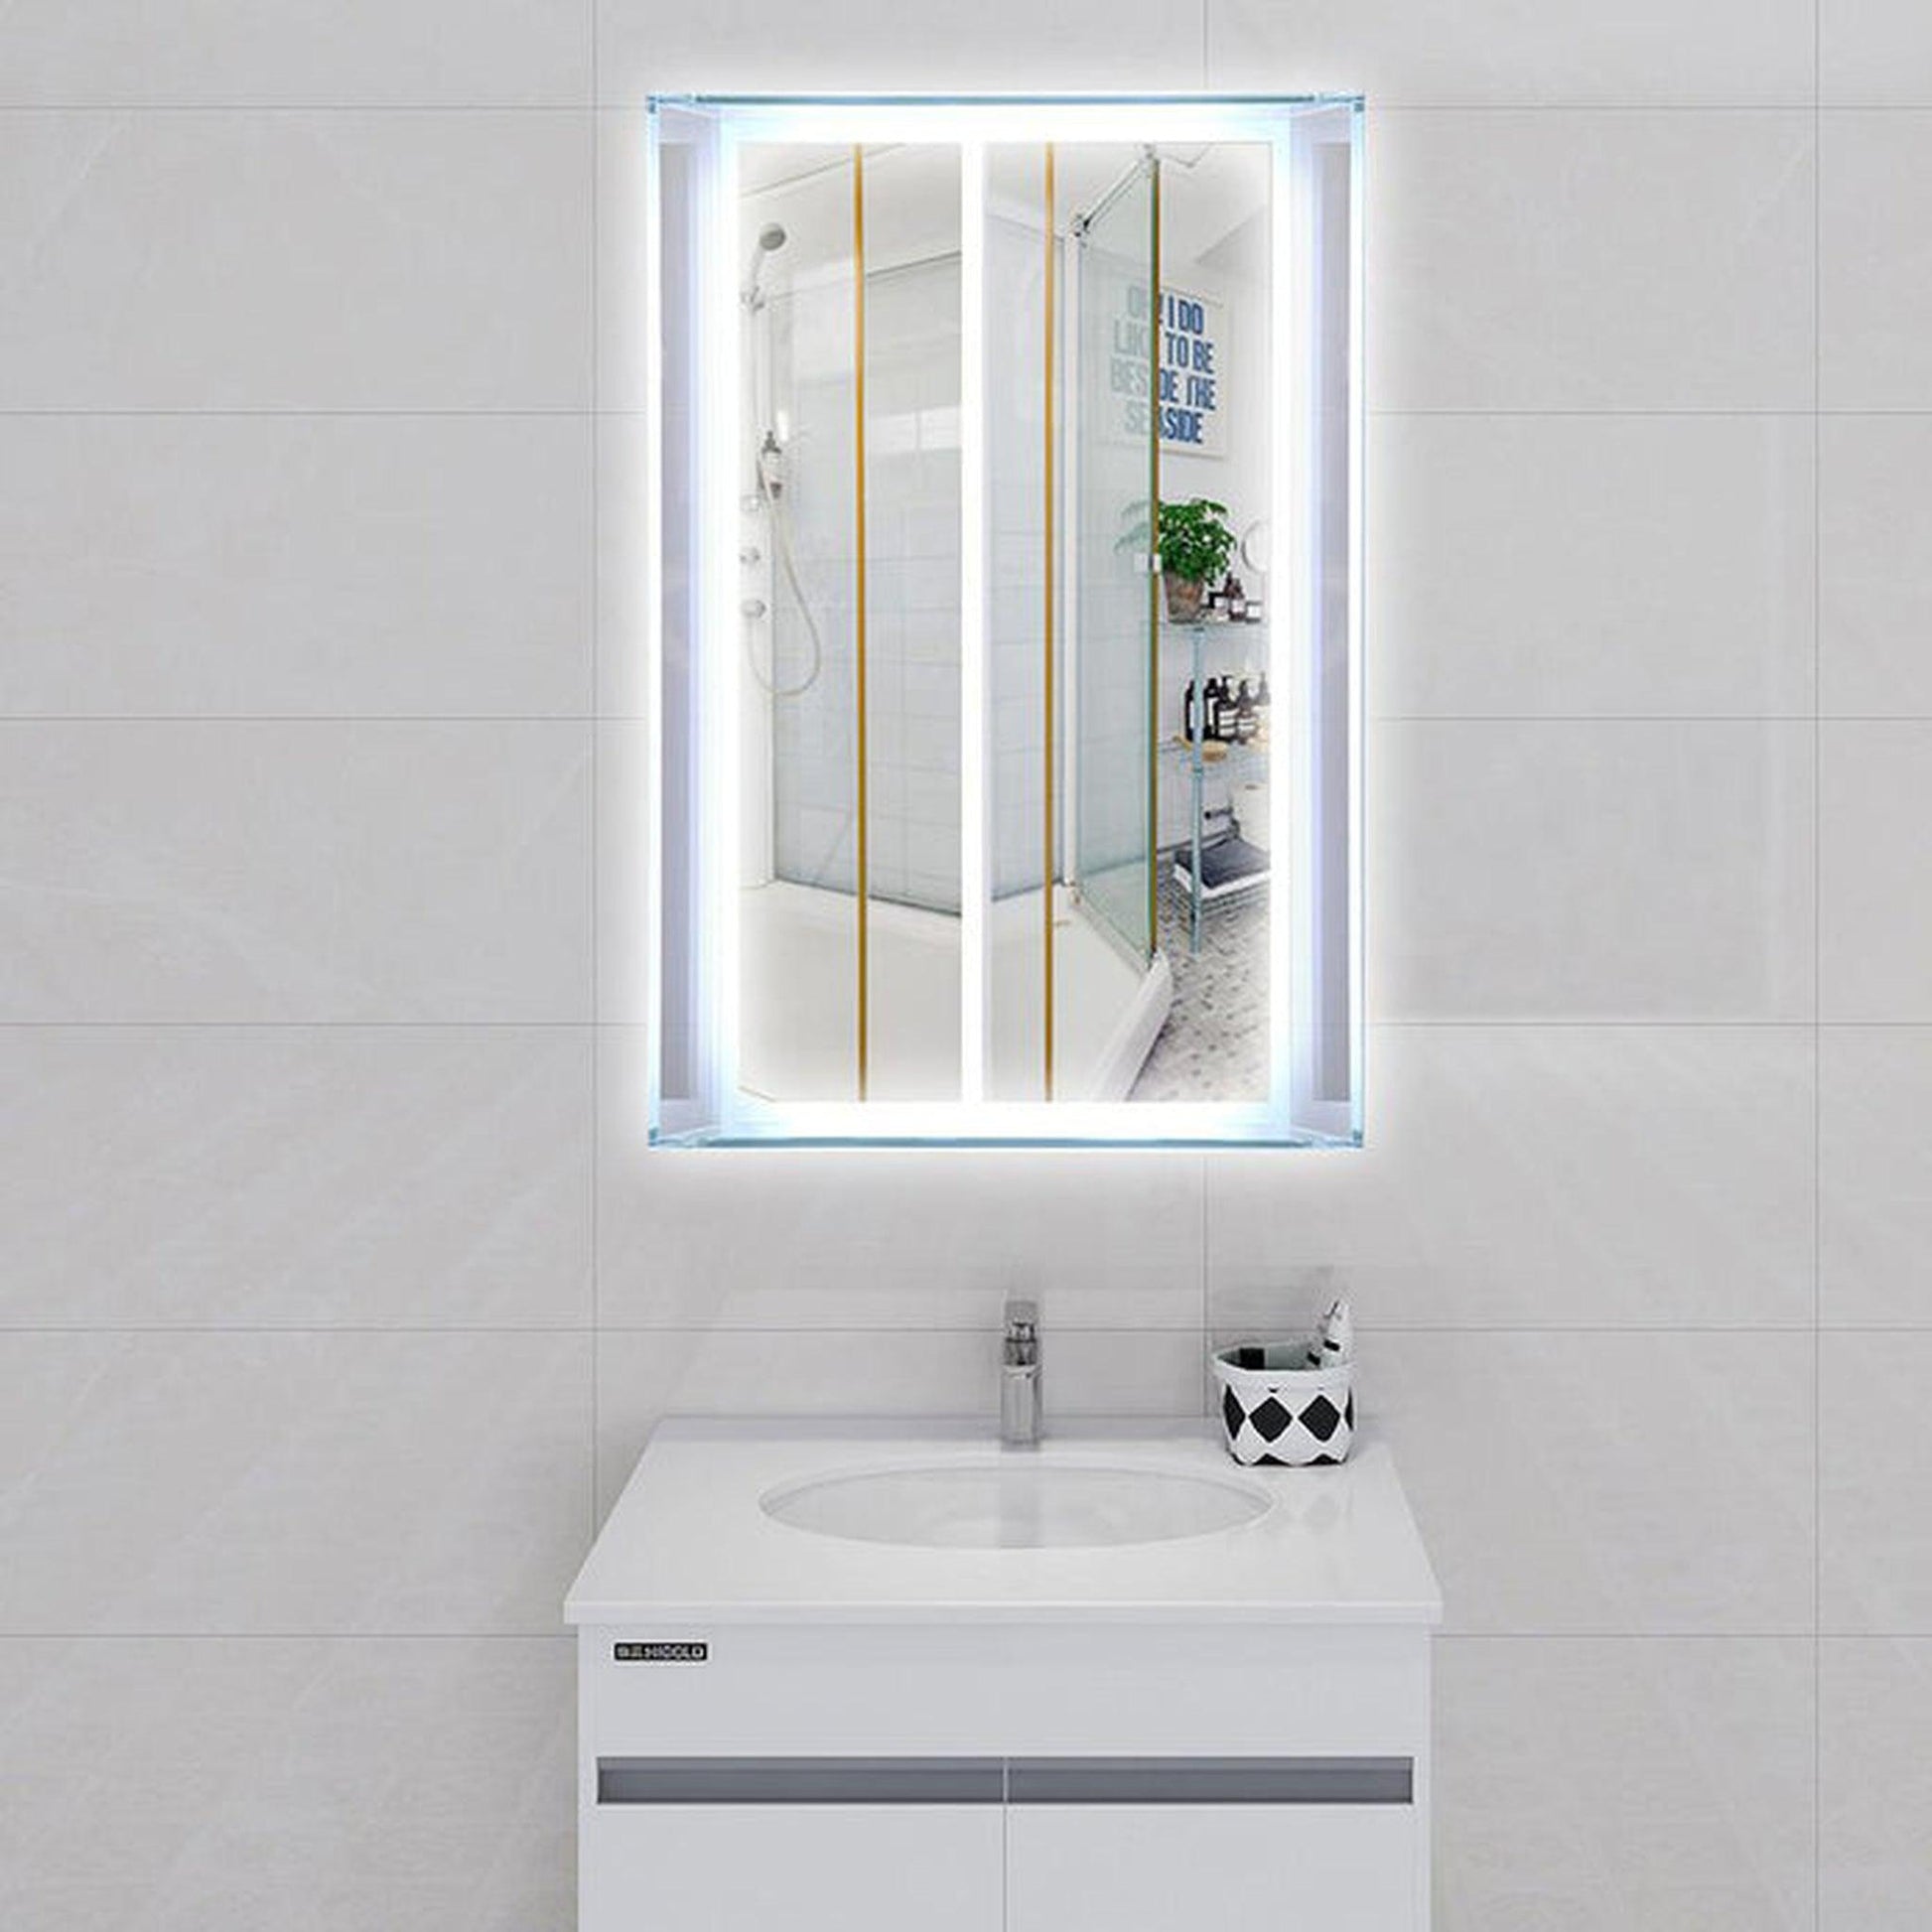 Vanity Art 31" W x 20" H Frameless Rectangular LED Lighted Bathroom Wall Mounted Vanity Mirror With Glass Cabinet and Touch Sensor